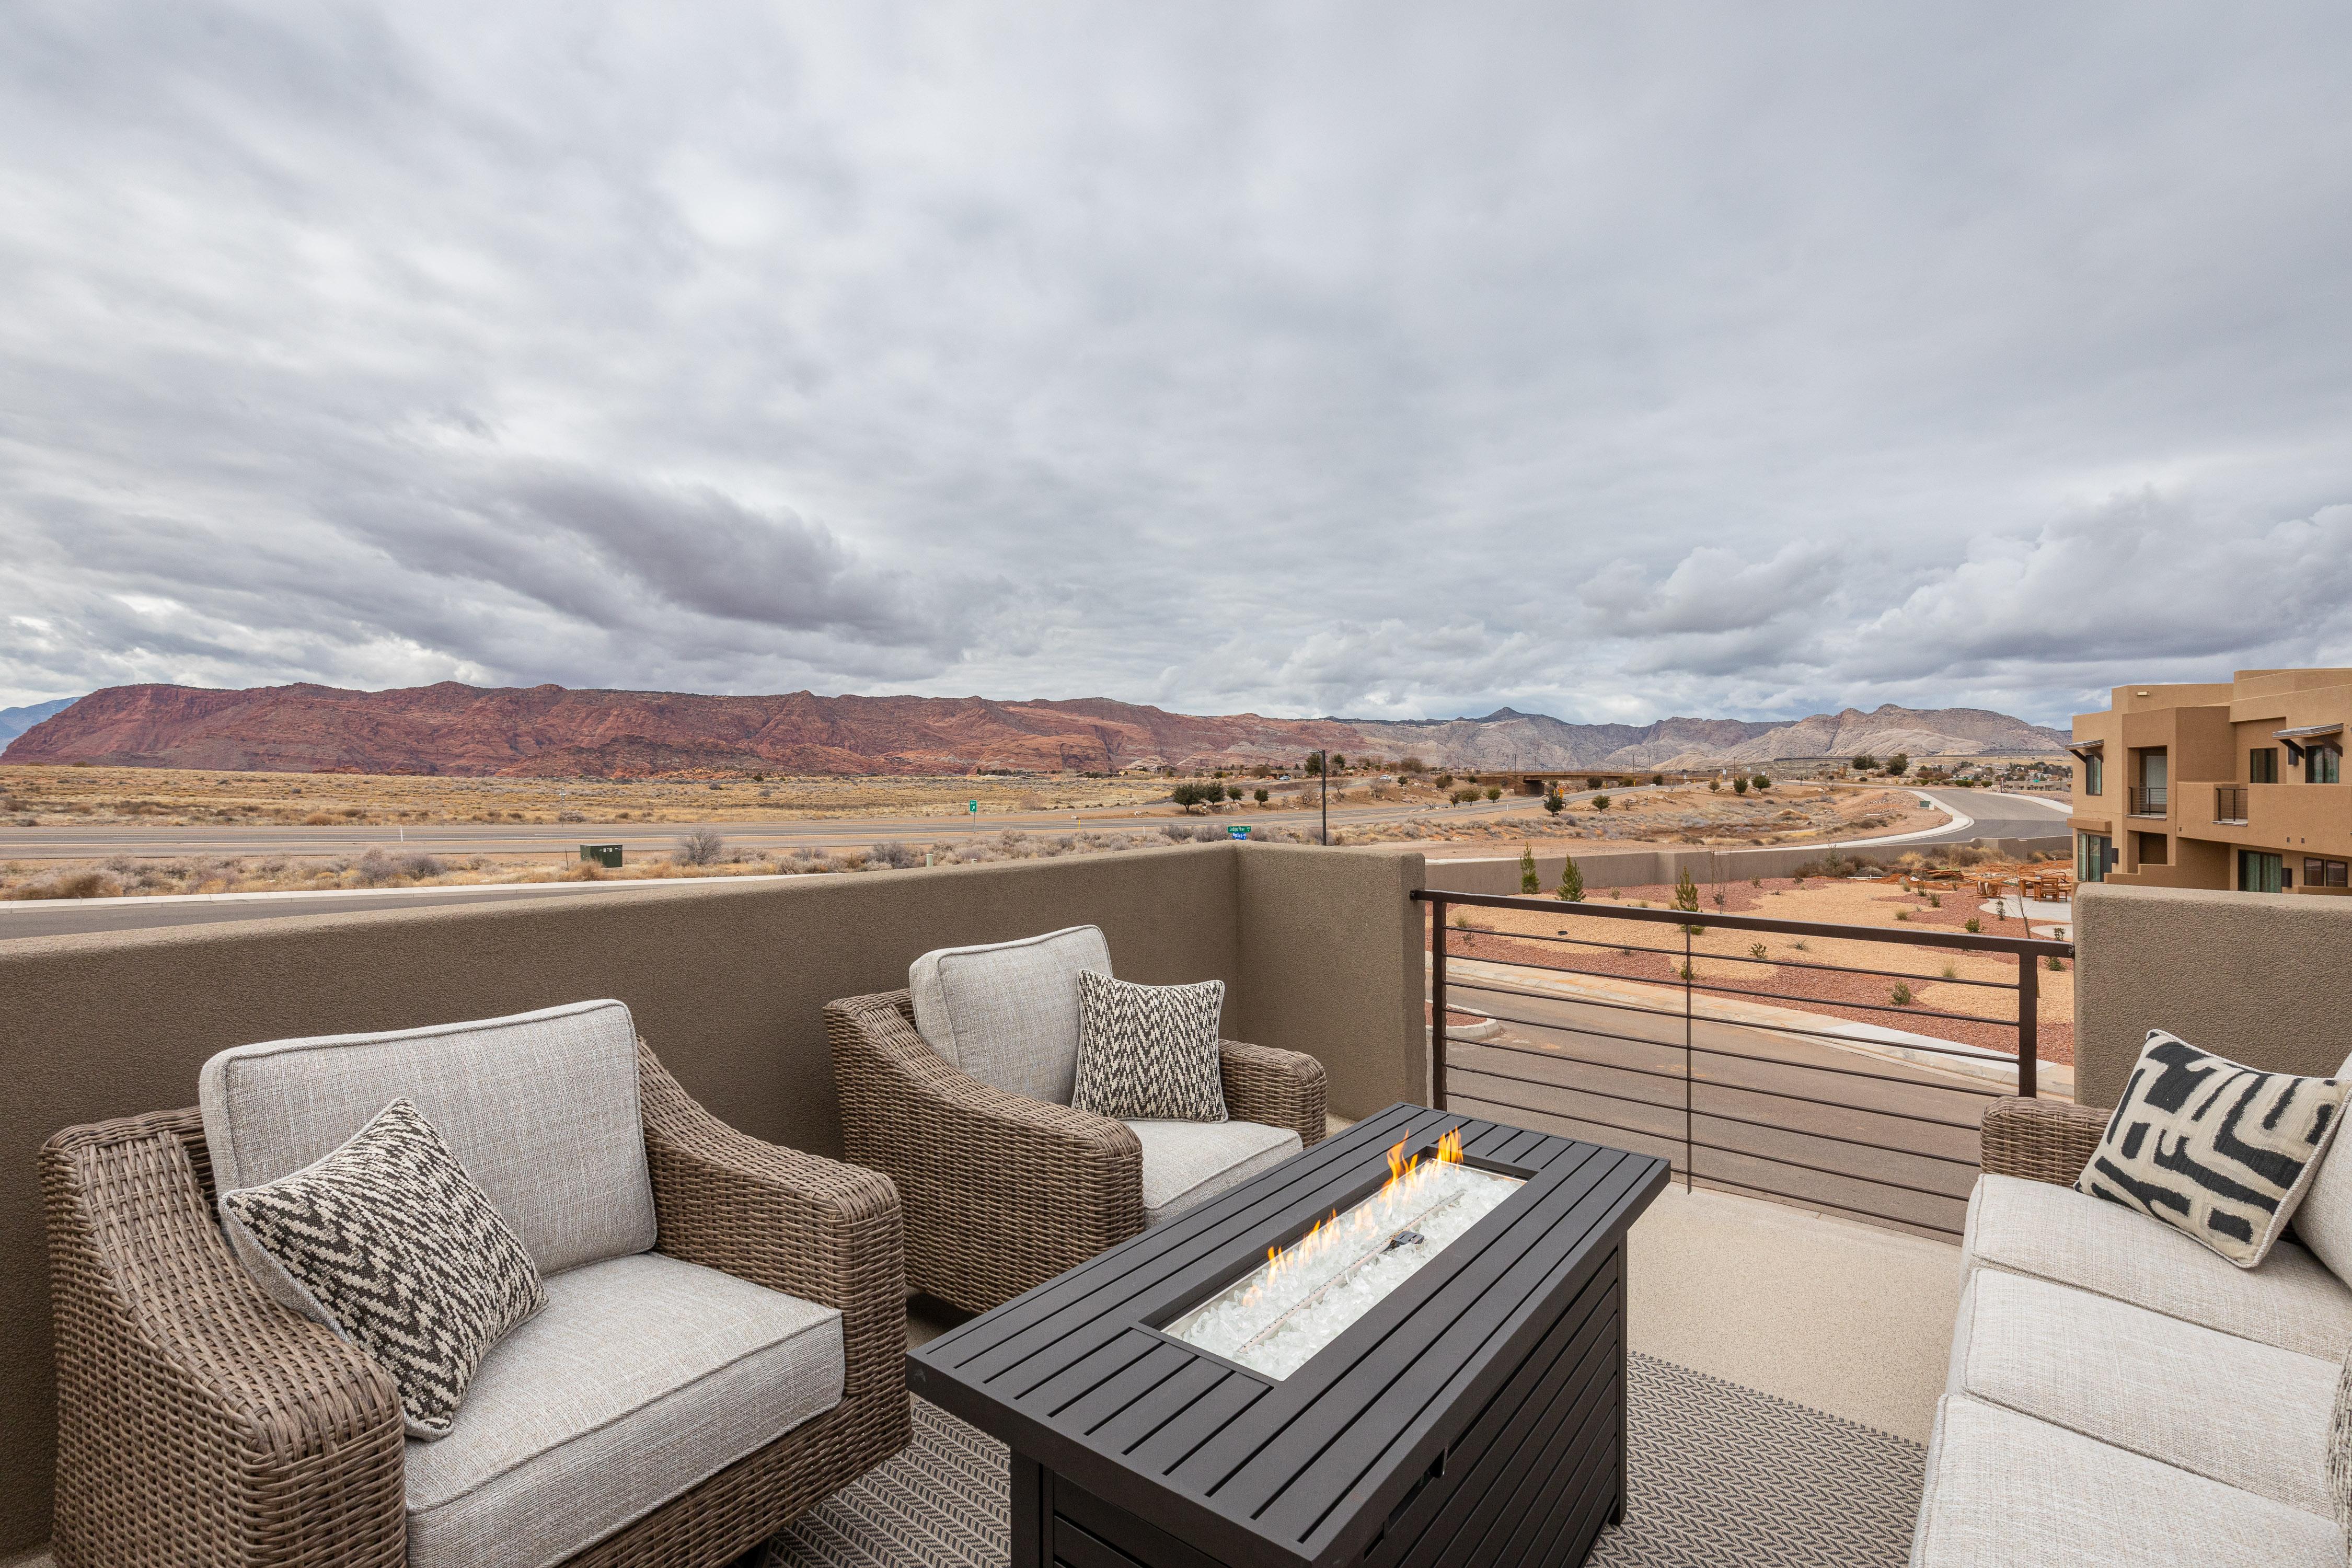 Stay warm next to the fire-pit and relax while watching the sunset over the red mountains.